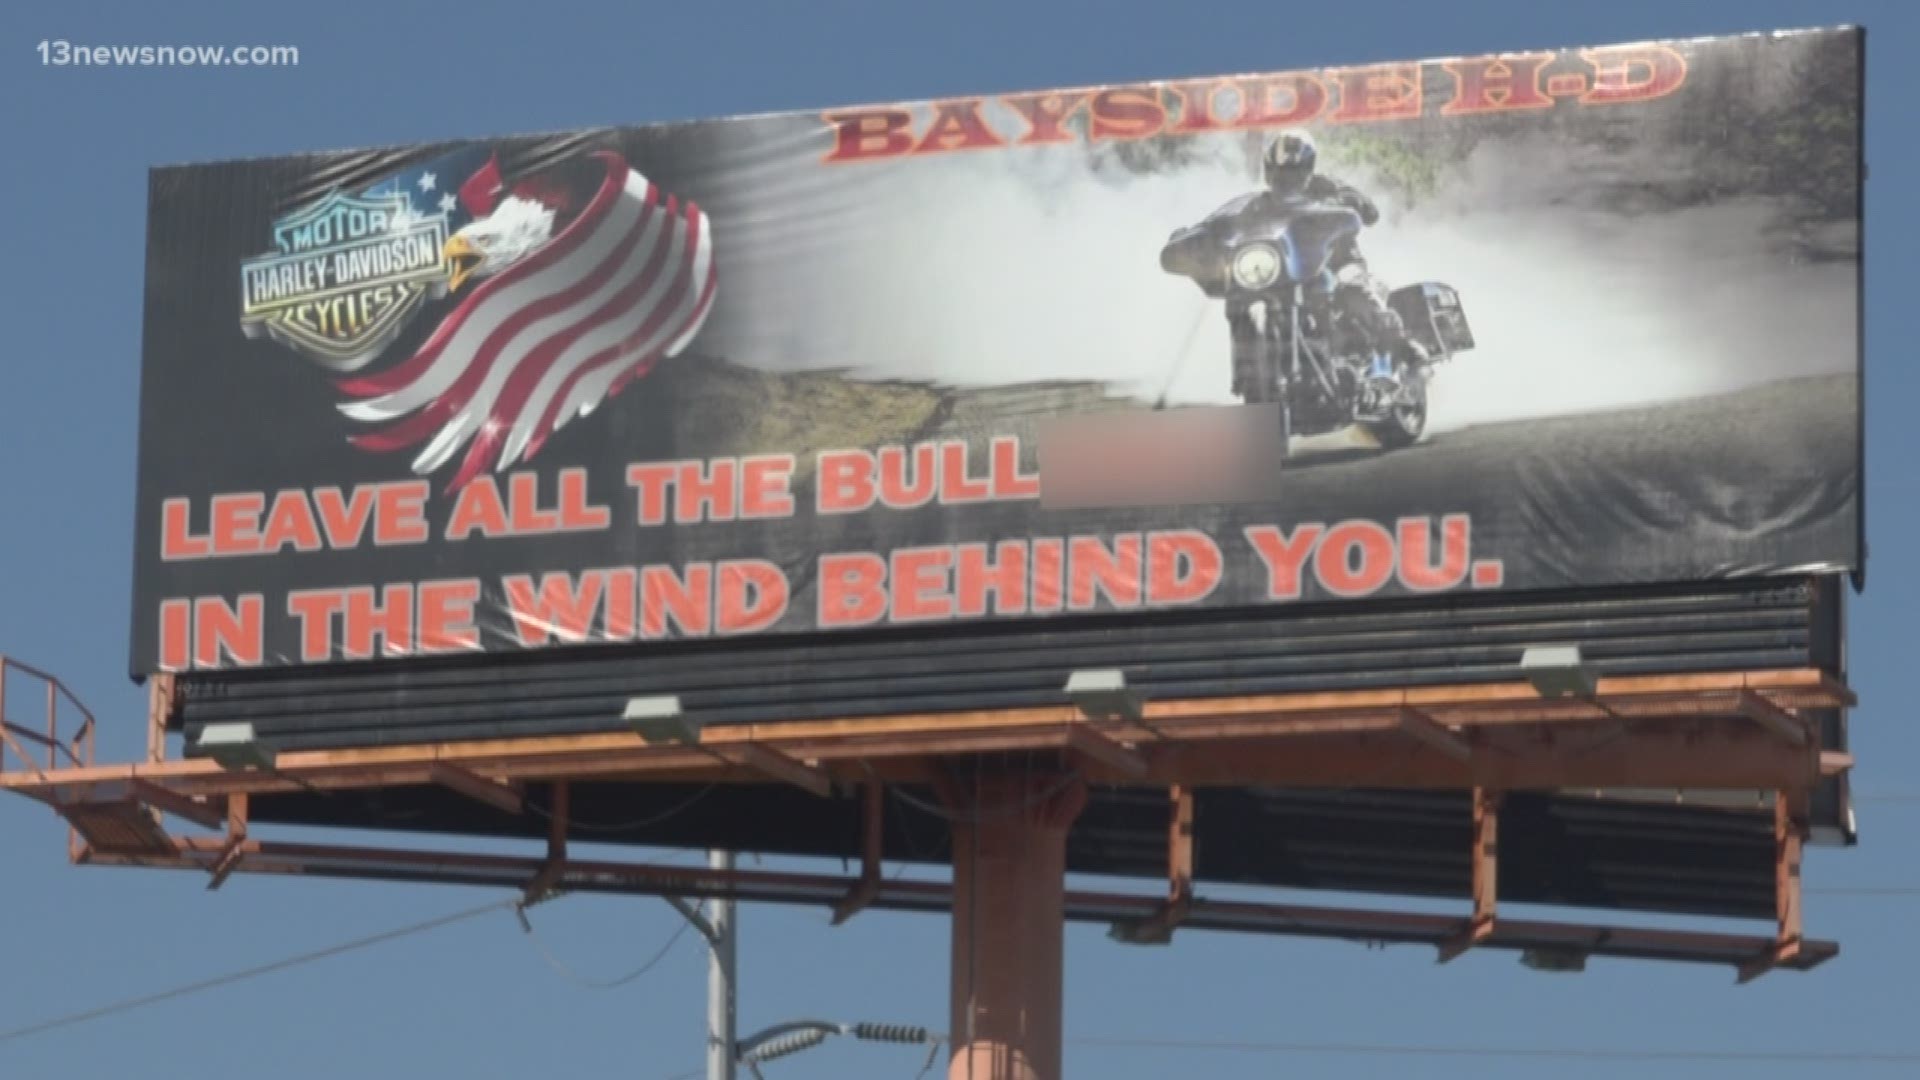 “Leave all the bull(expletive) in the wind behind you," the billboard states. “The billboard company approved it, Harley Davidson approved it, we didn’t think it was an offensive term," said store GM Shawn Robinson.